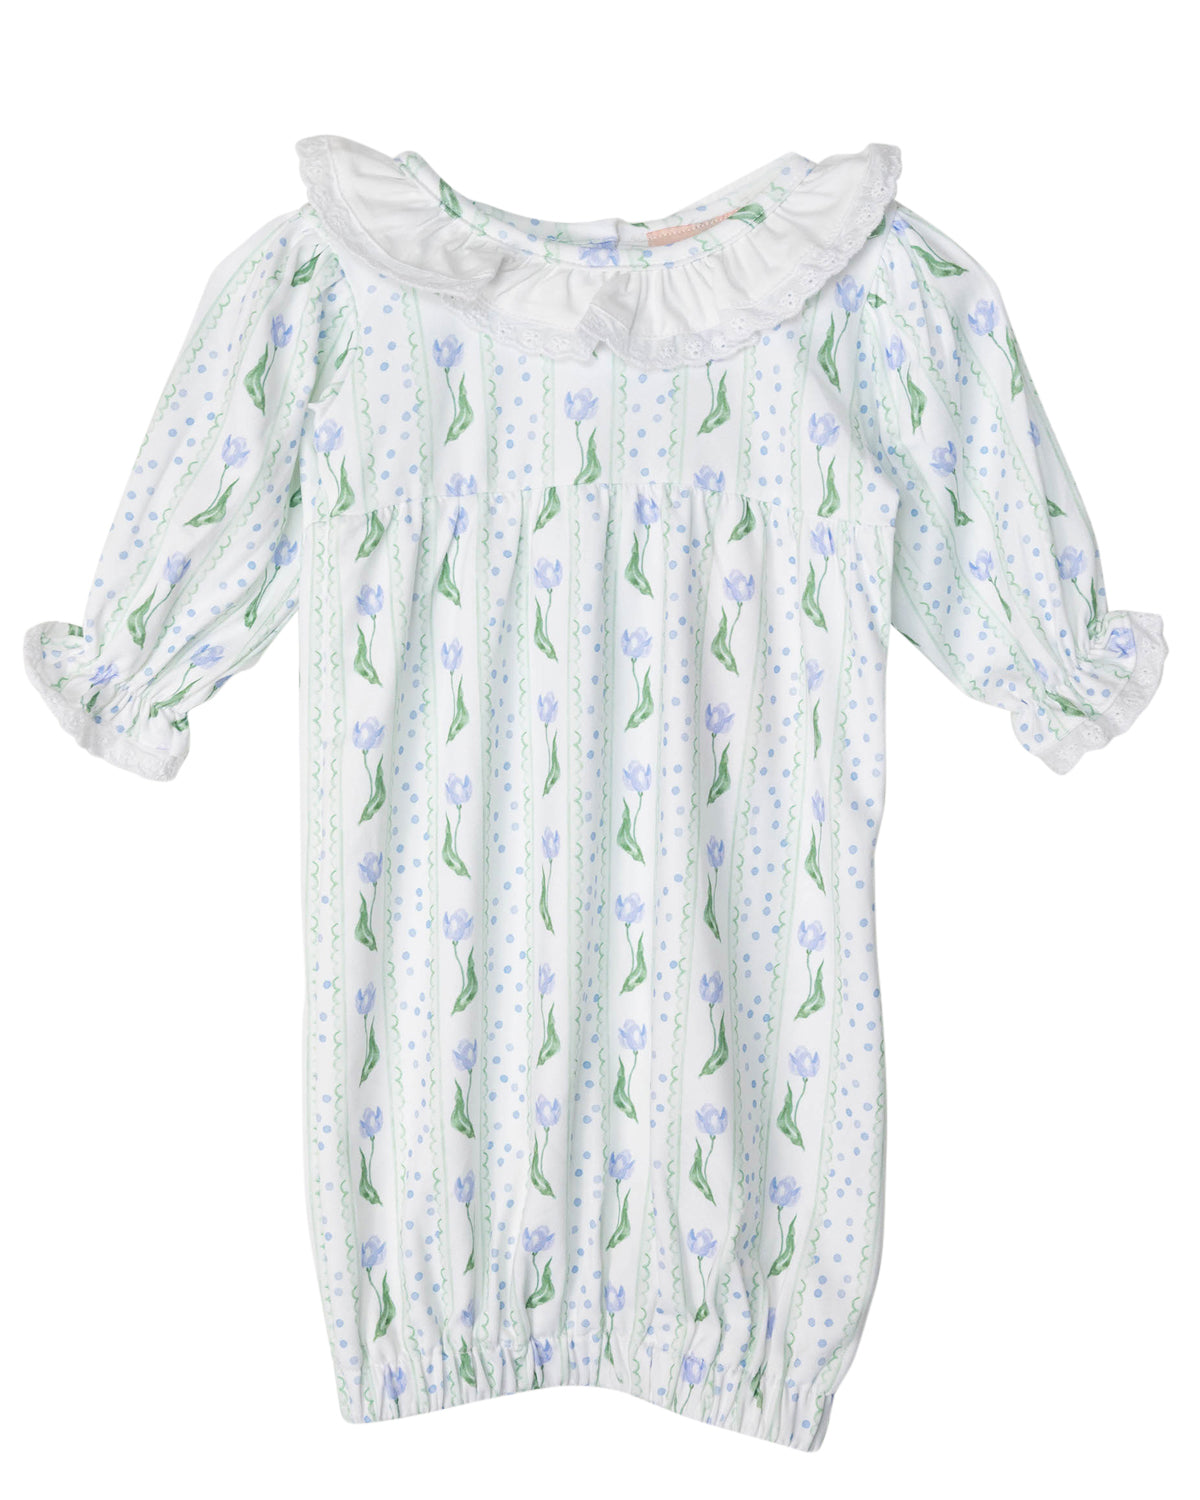 Dotty Tulips Baby Gown